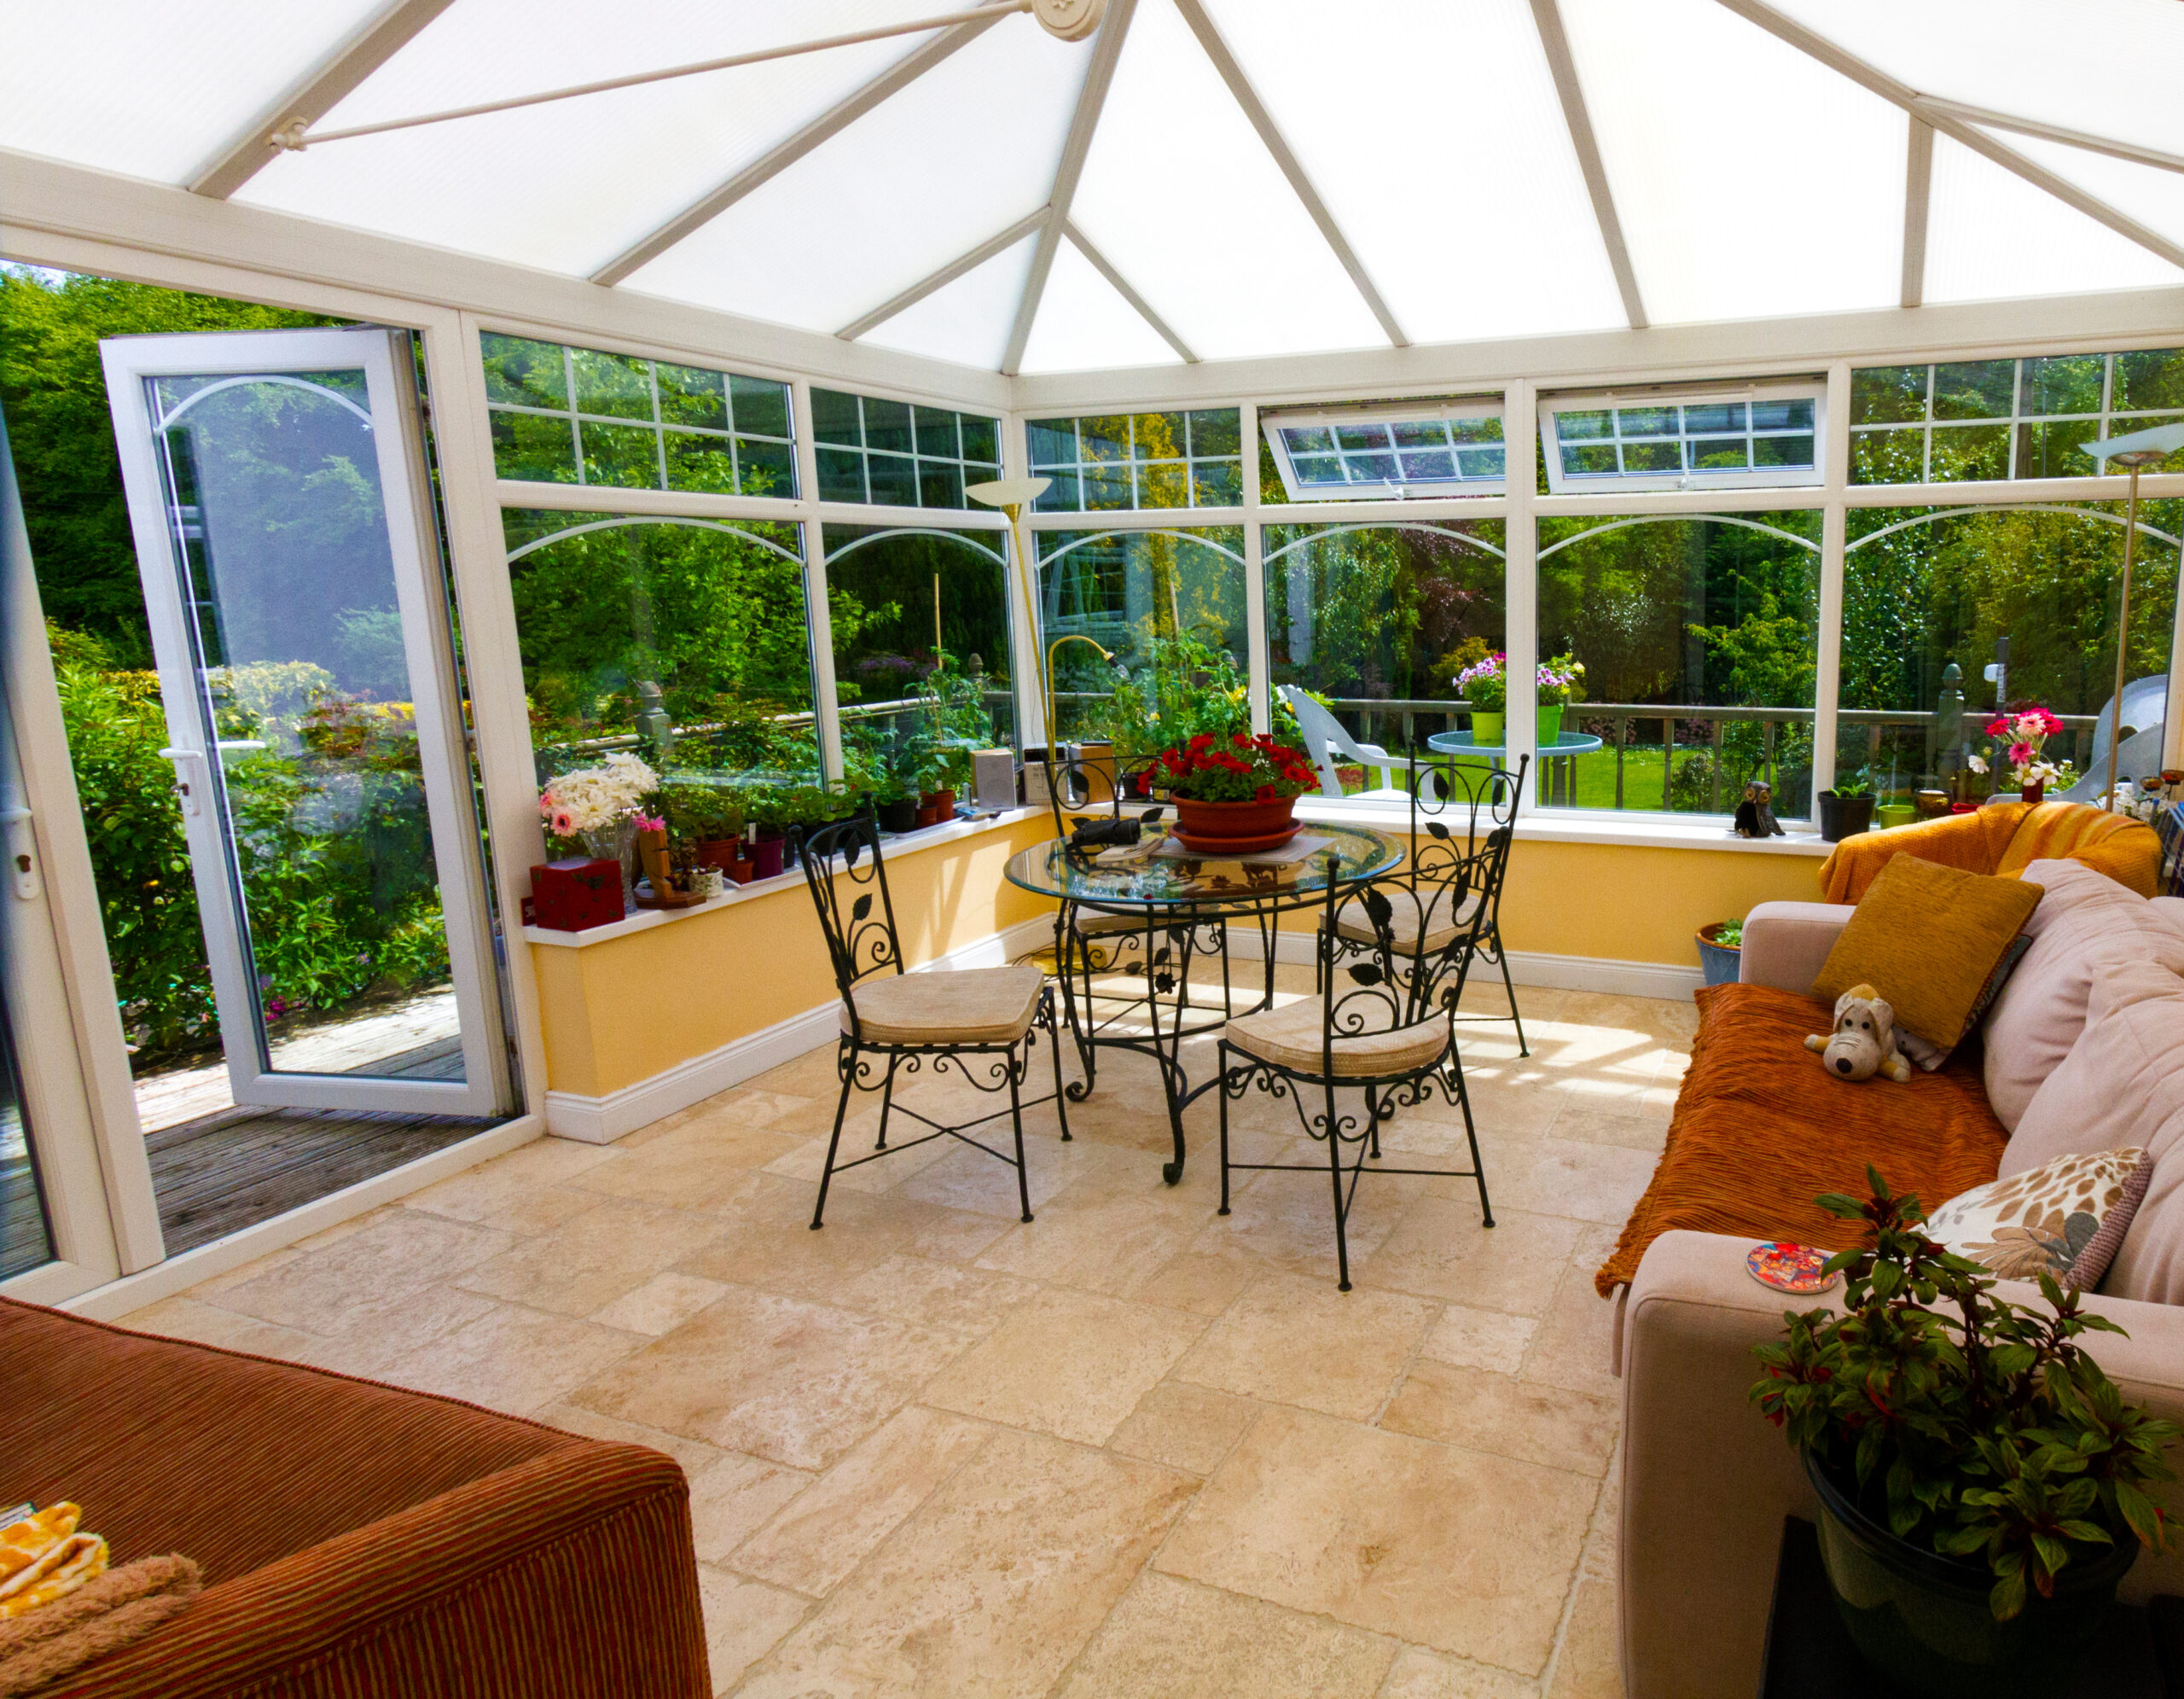 interior of a bespoke conservatory designed by Stormshield for a property in Cramlington